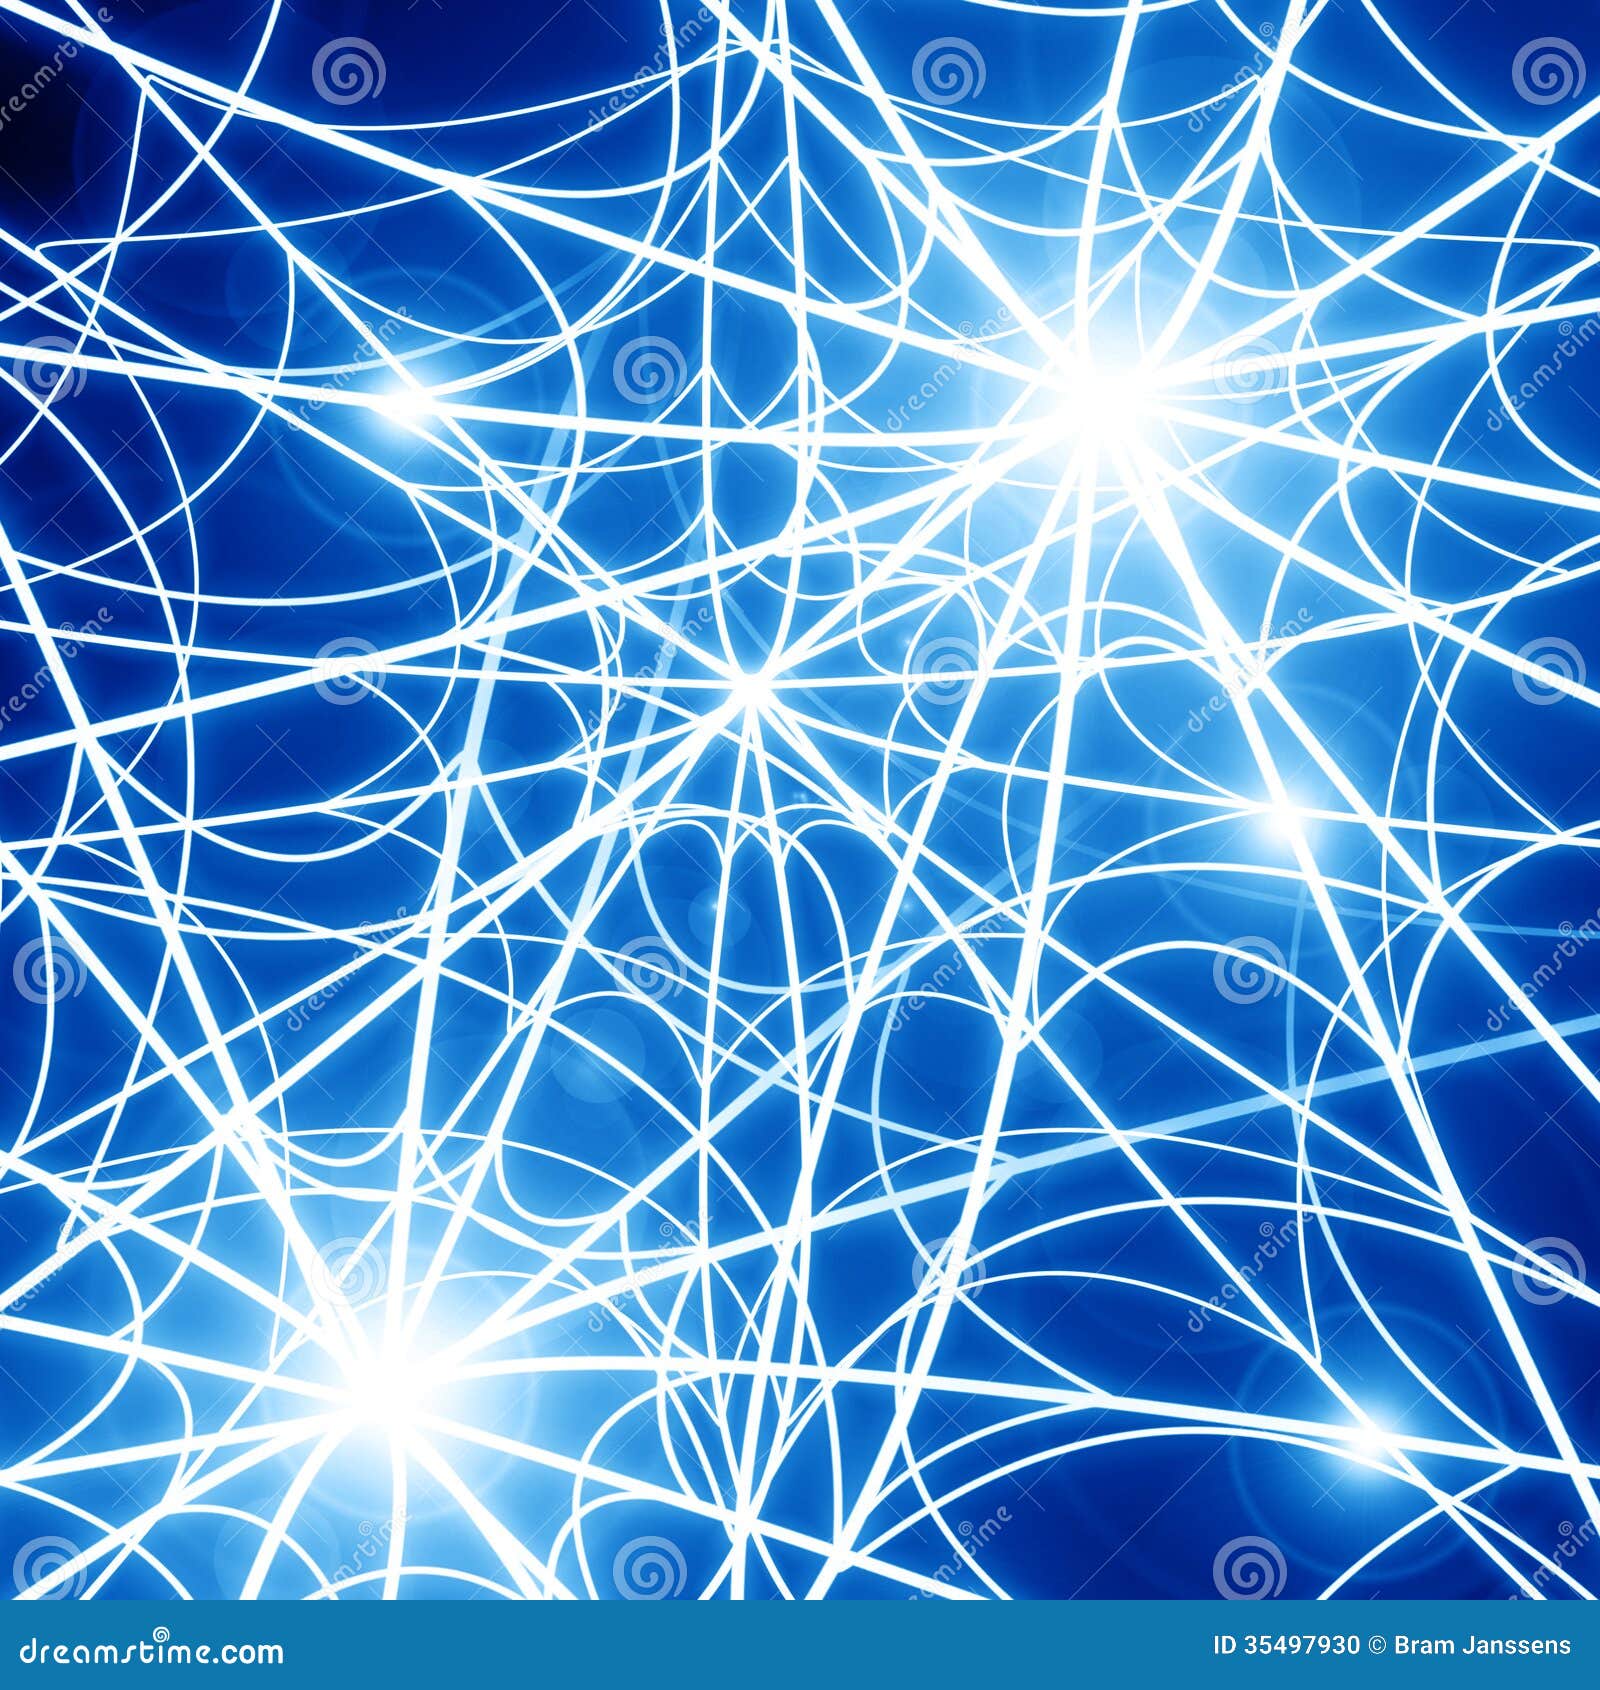 Glowing spider web stock illustration. Illustration of glowing - 35497930